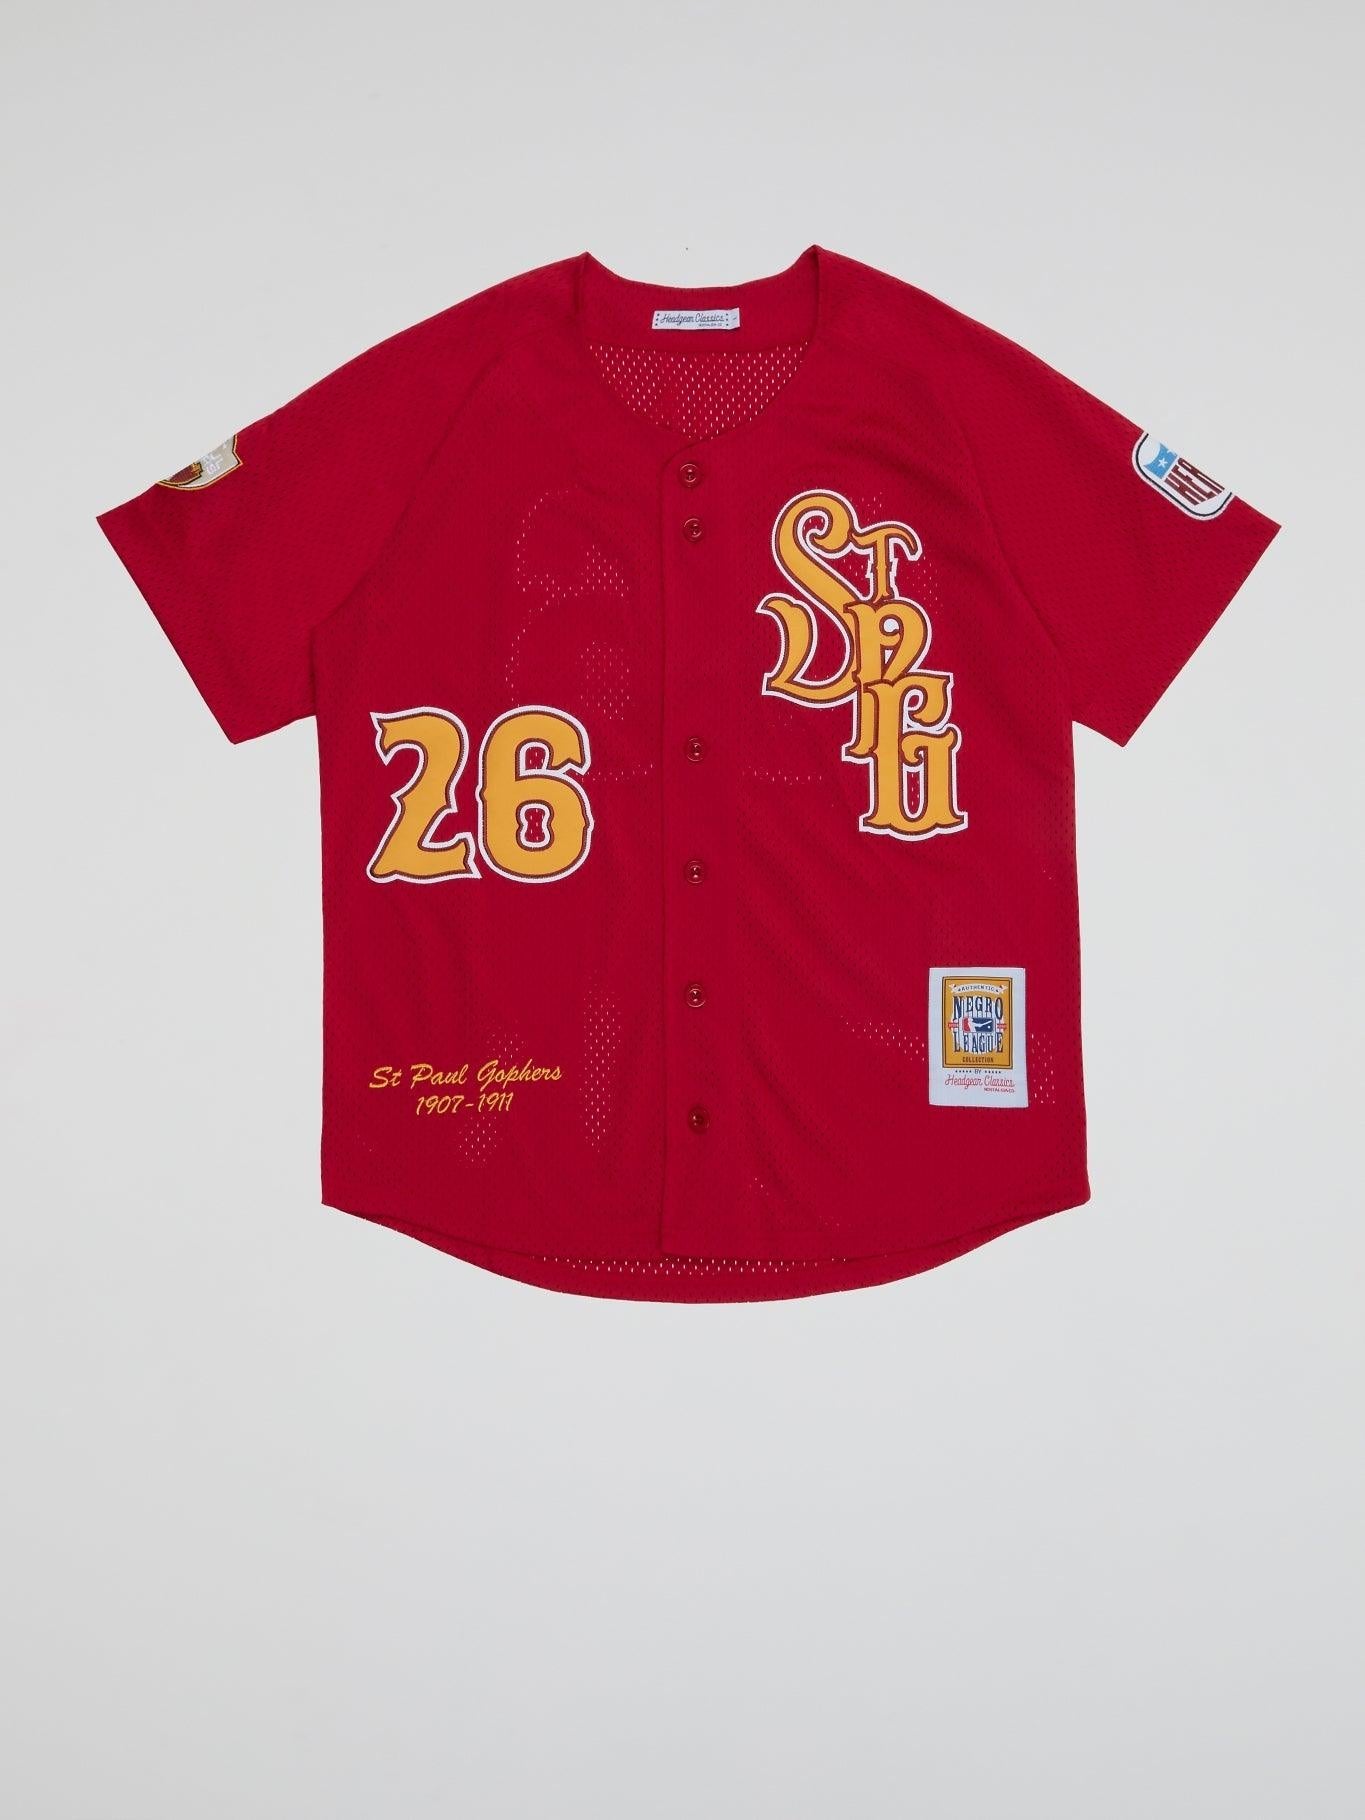 St Paul Gophers Button Down Jersey - B-Hype Society